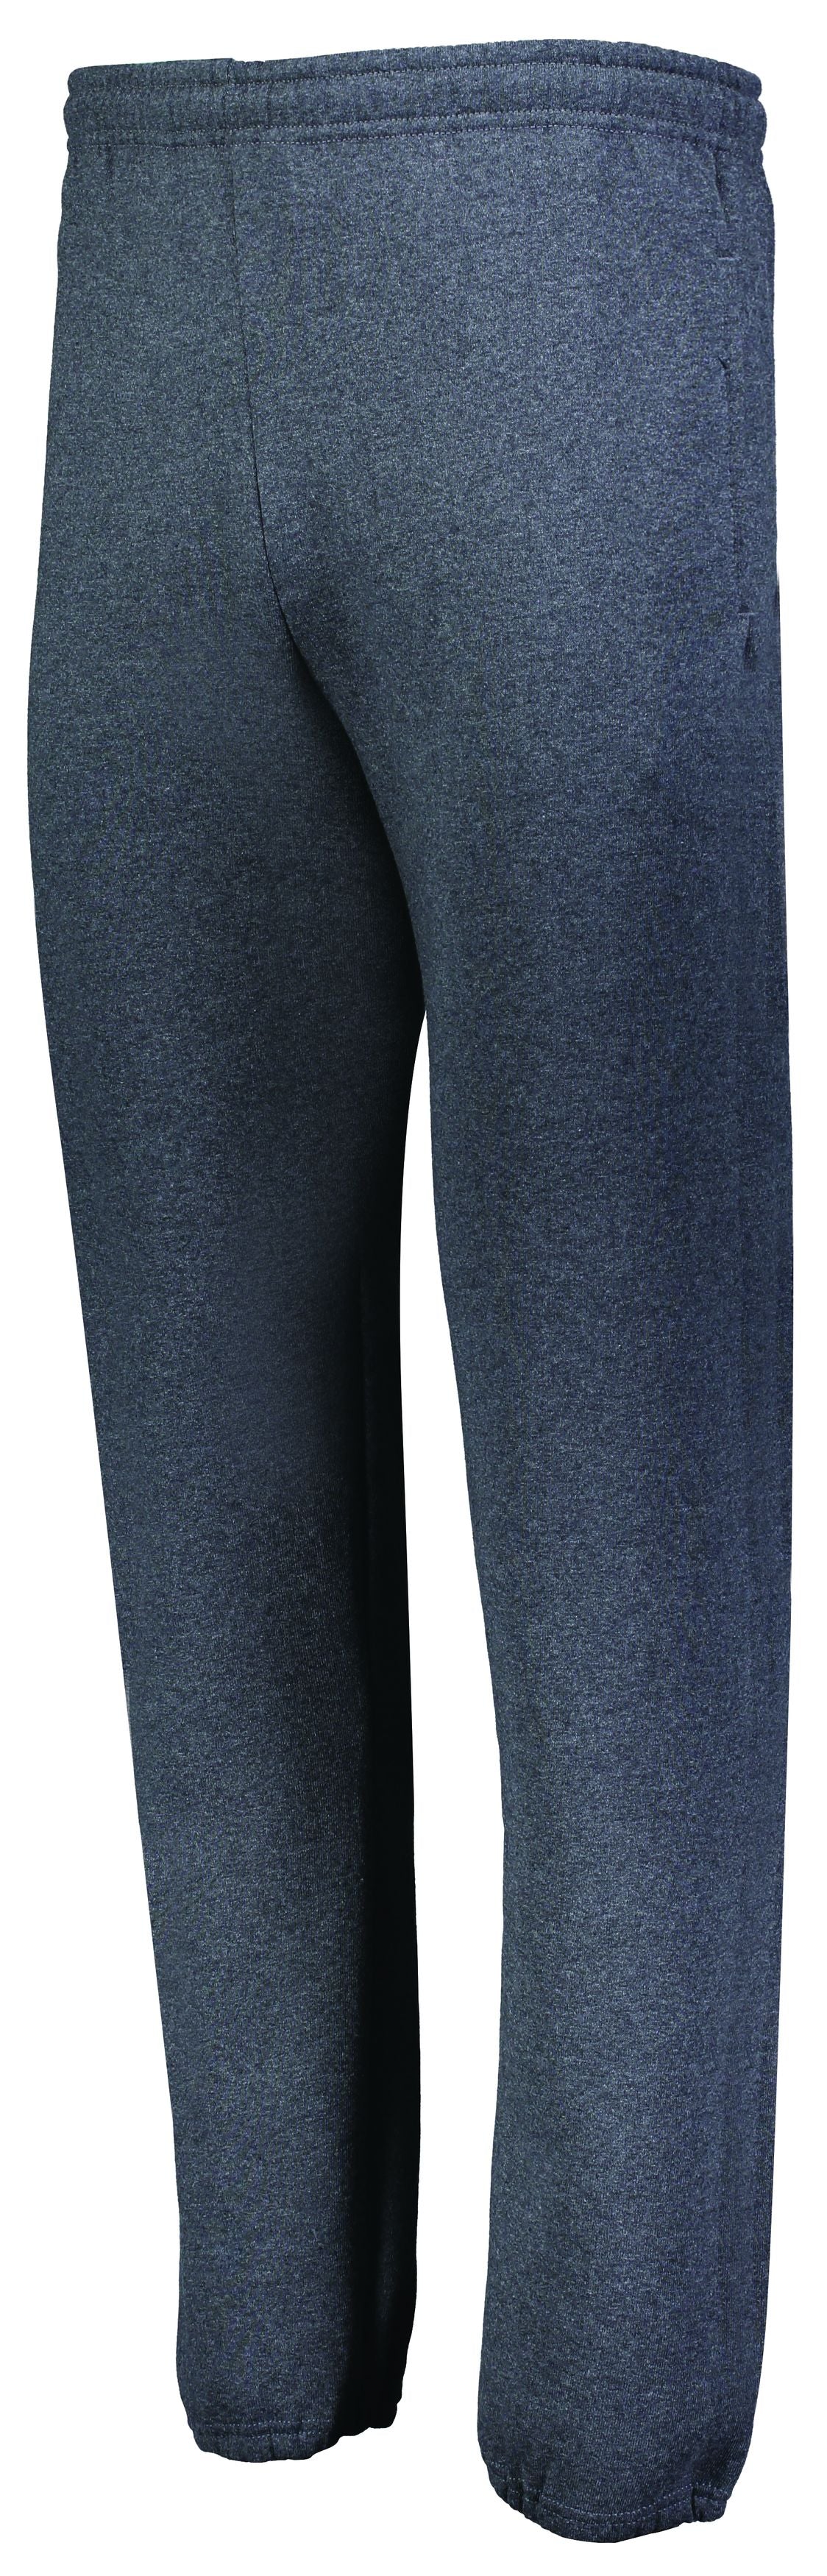 Russell Athletic Dri-Power Closed Bottom Pocket Sweatpant in Black Heather  -Part of the Adult, Adult-Pants, Pants, Russell-Athletic-Products product lines at KanaleyCreations.com